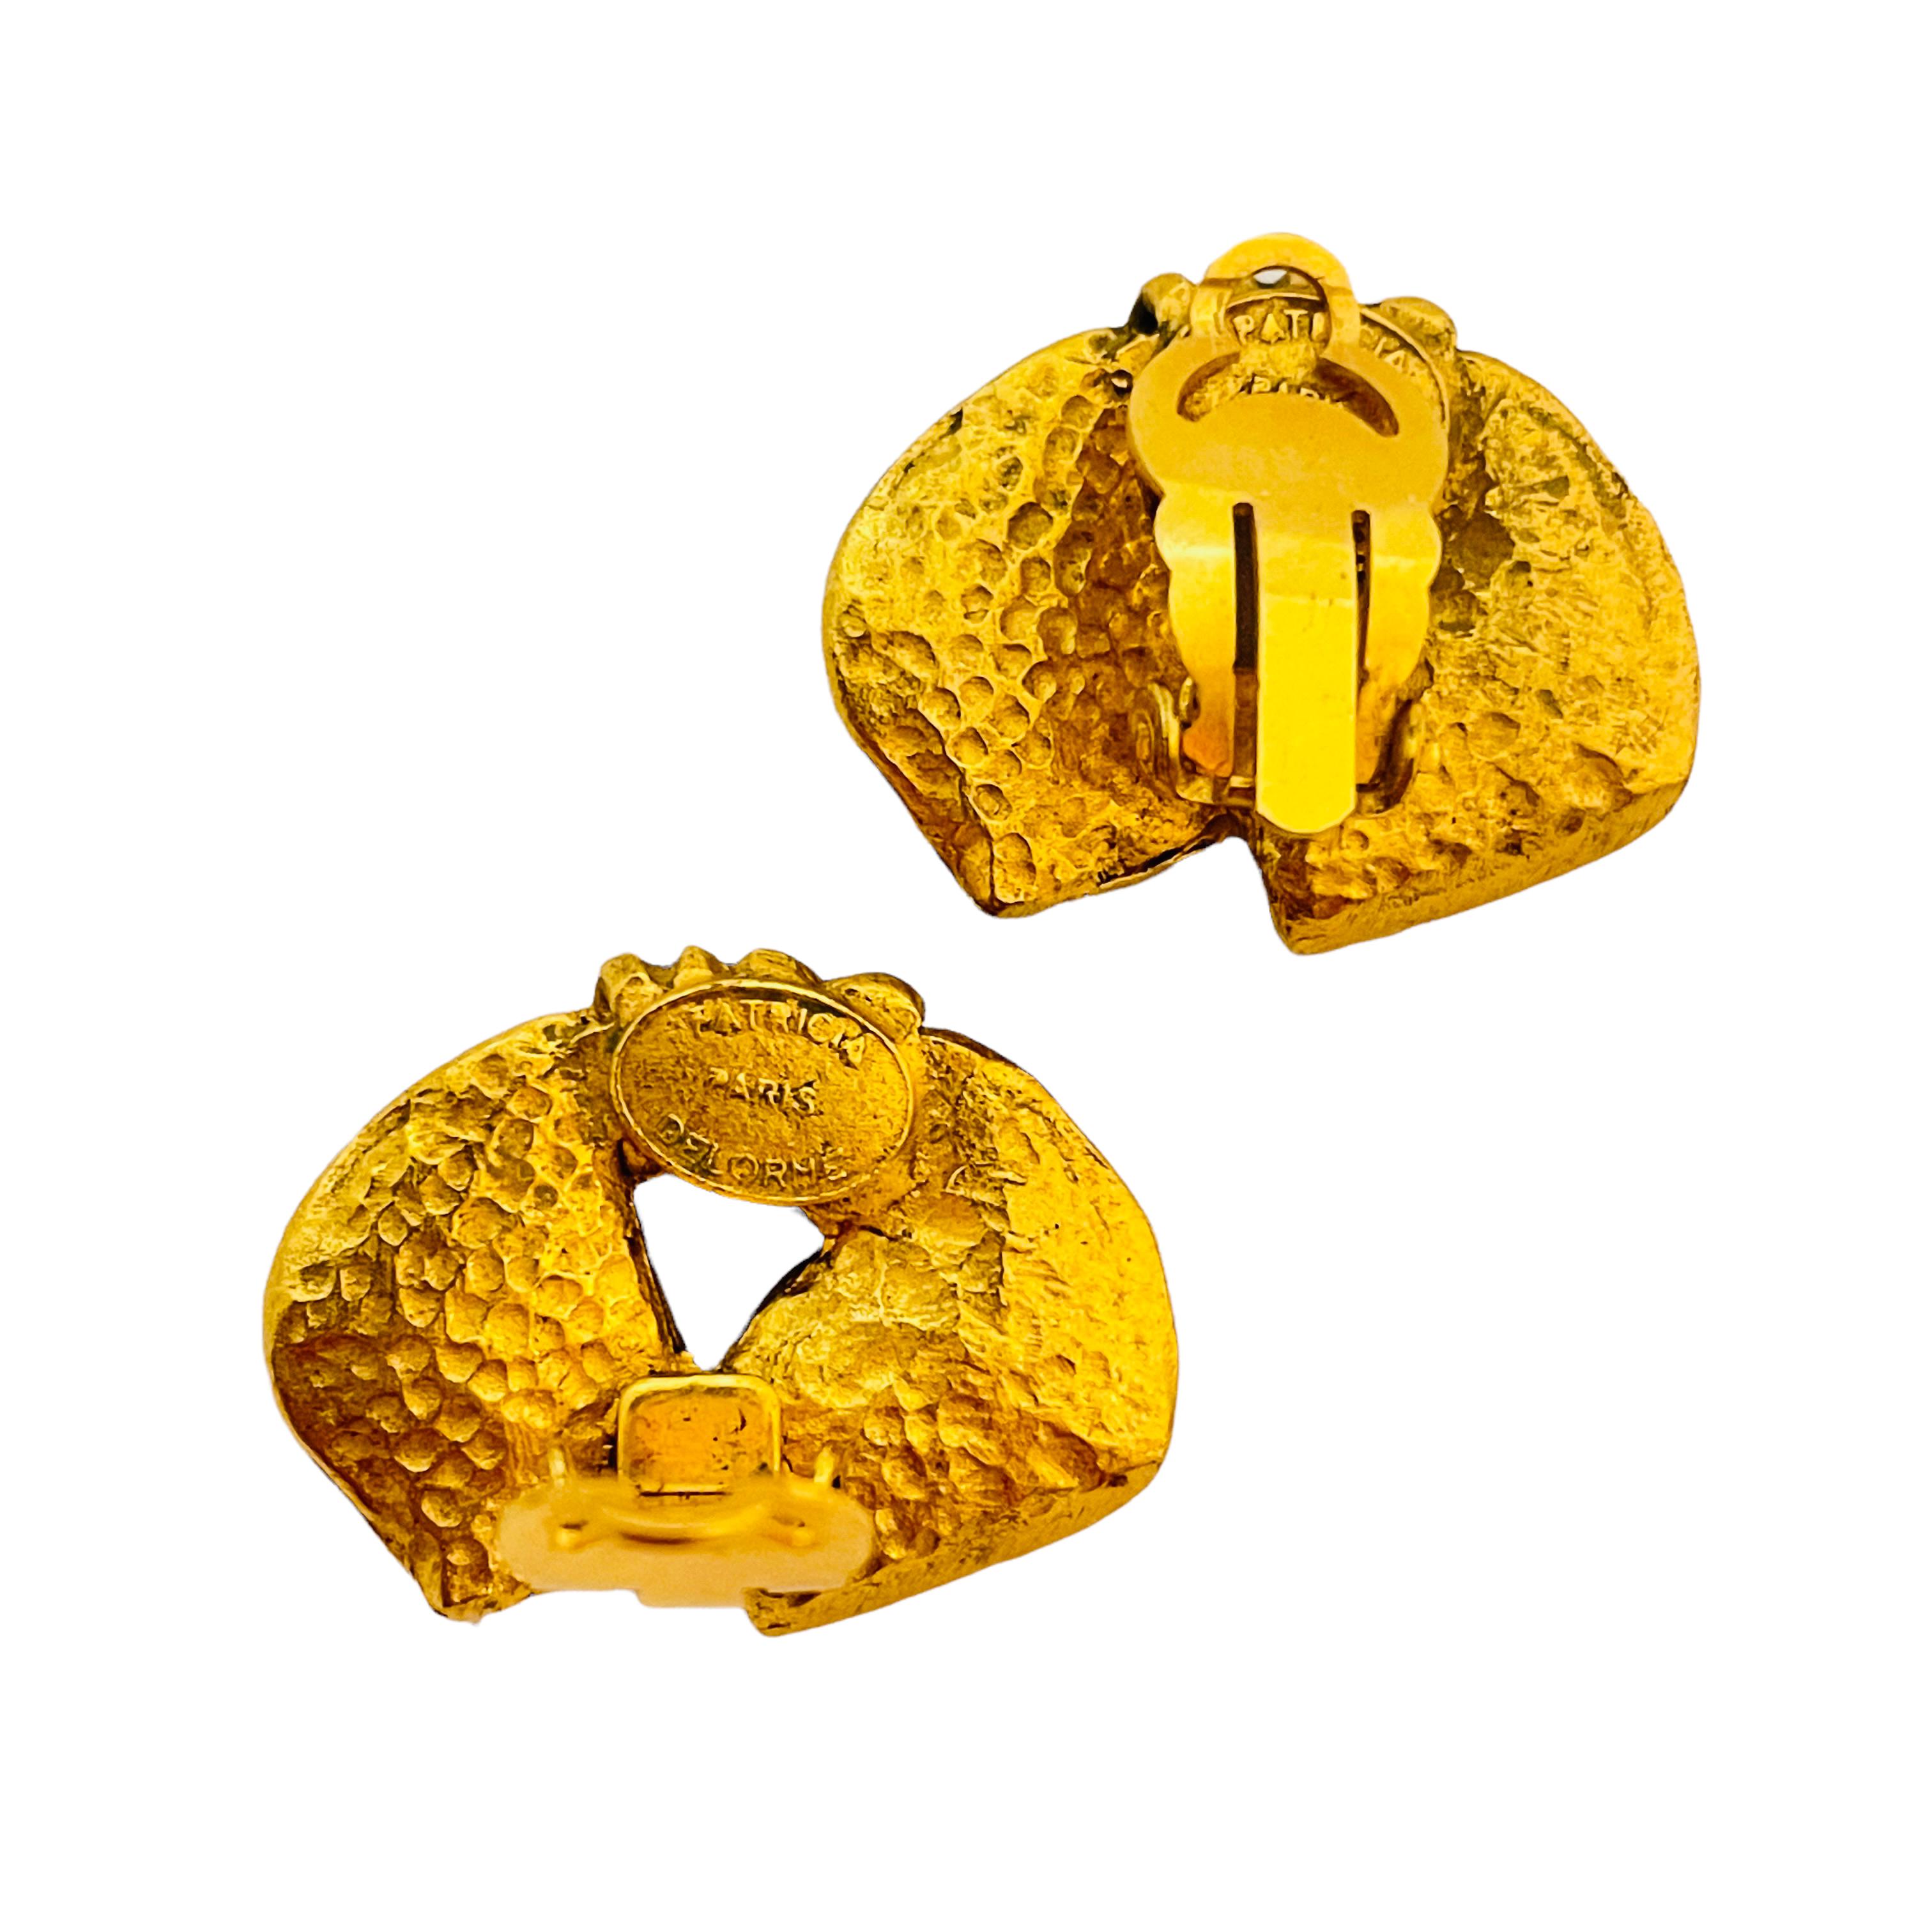 Vtg PATRICIA DELORME PARIS gold bow clip on earrings designer runway In Good Condition For Sale In Palos Hills, IL